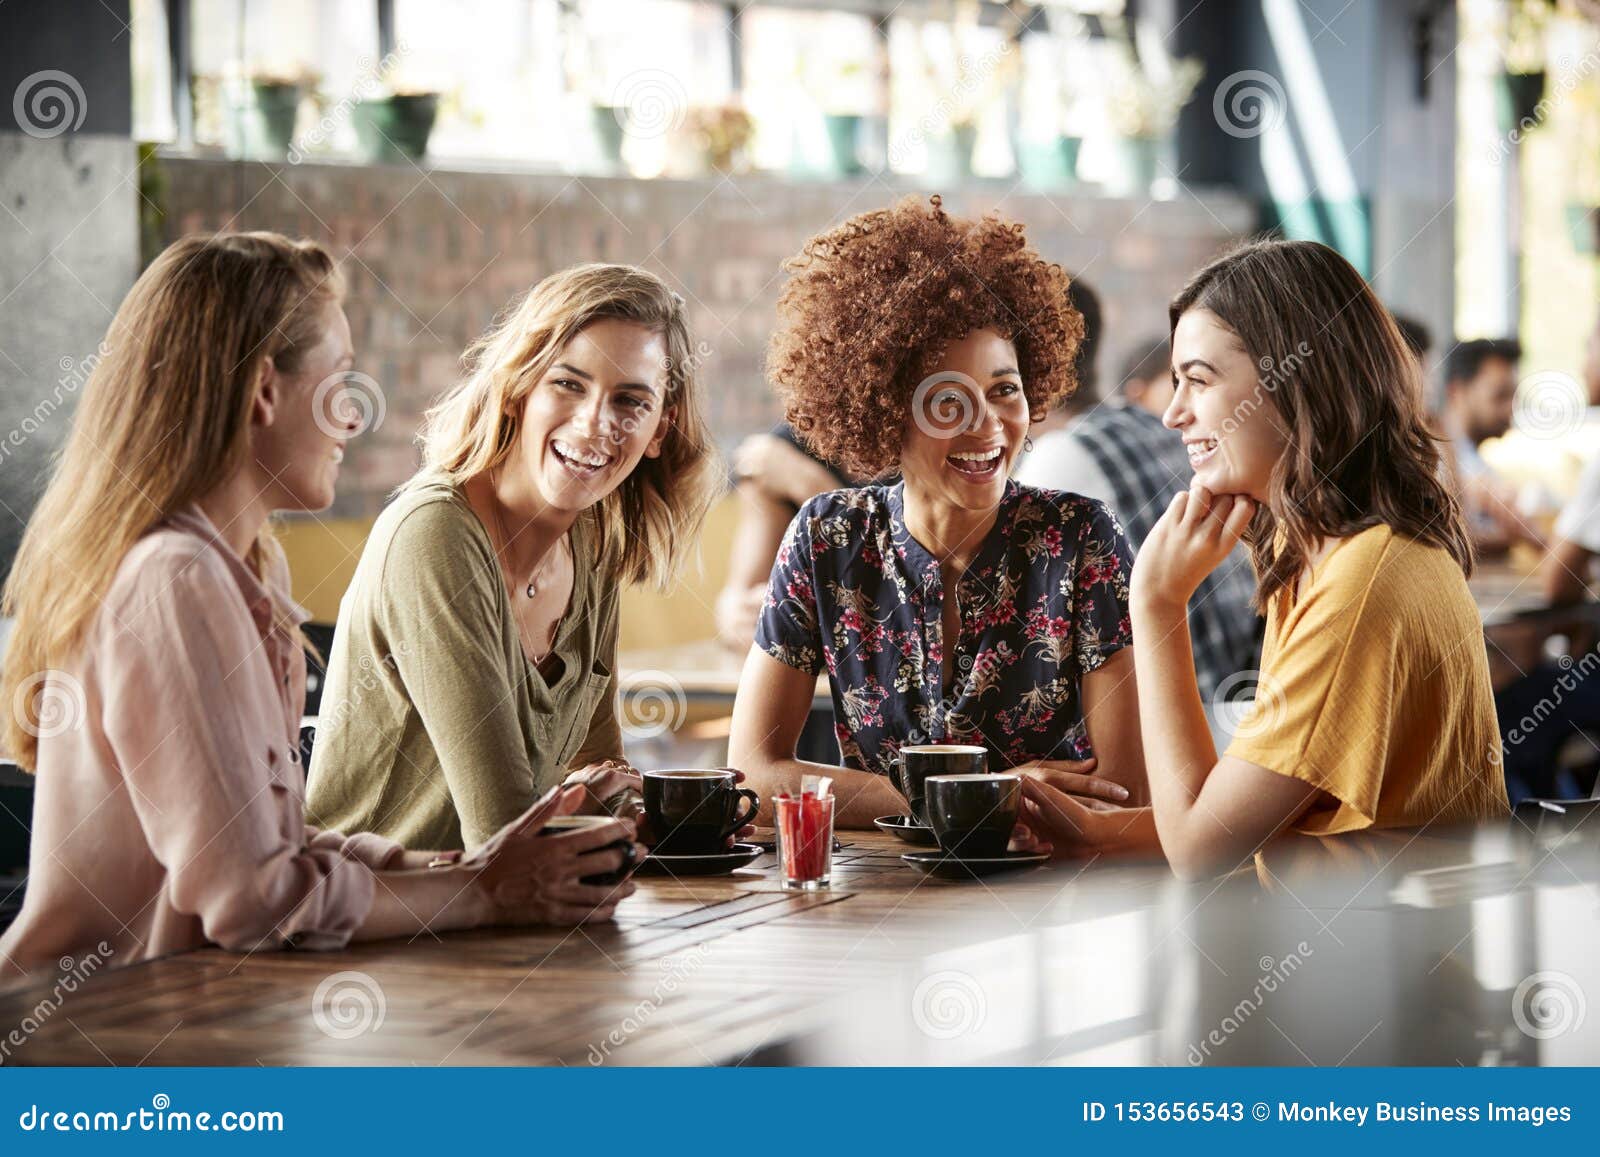 four young female friends meeting sit at table in coffee shop and talk